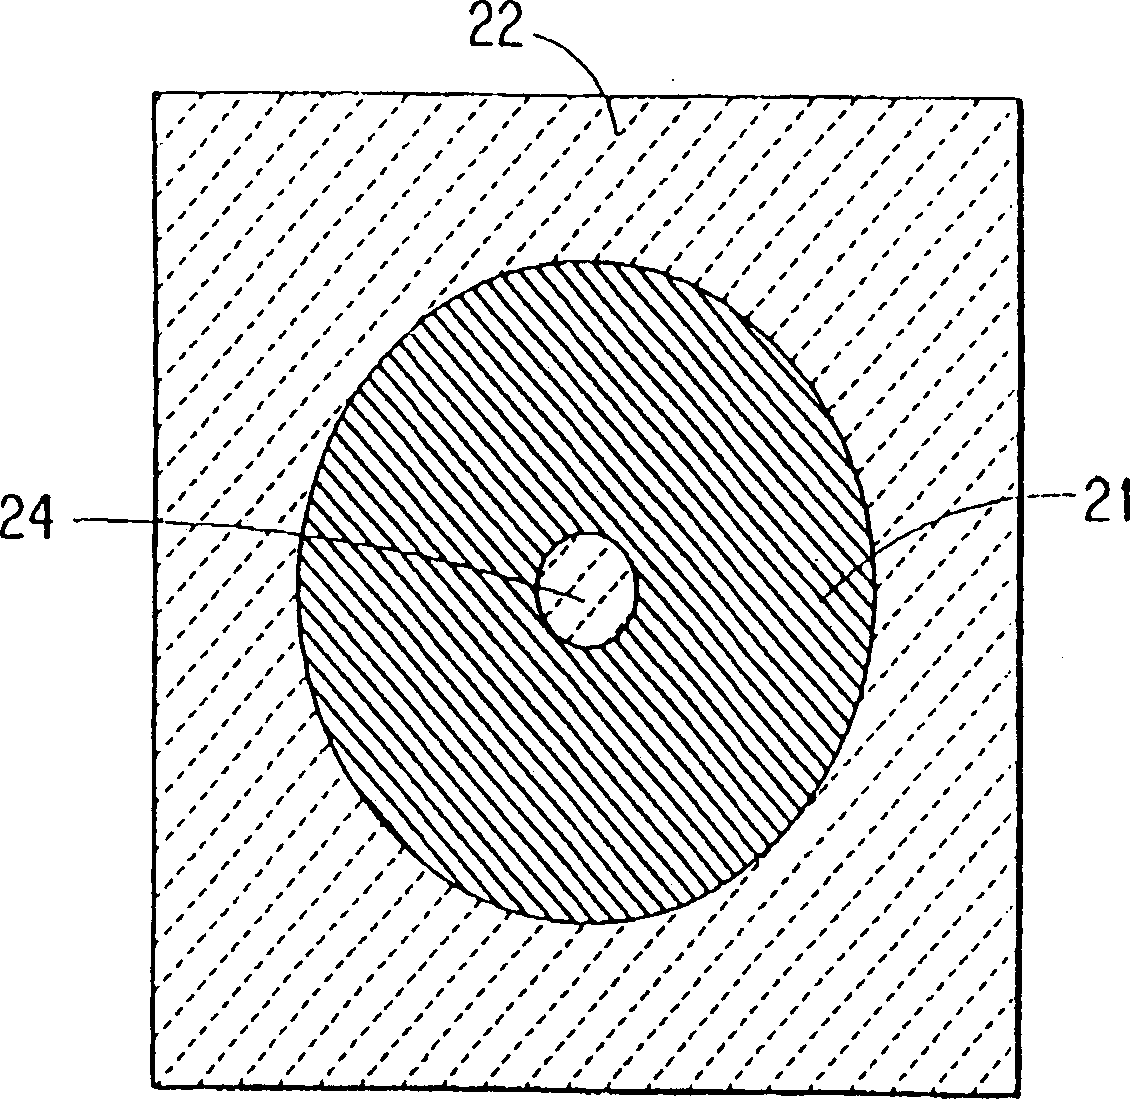 Resonators for high power high temp. superconducting devices